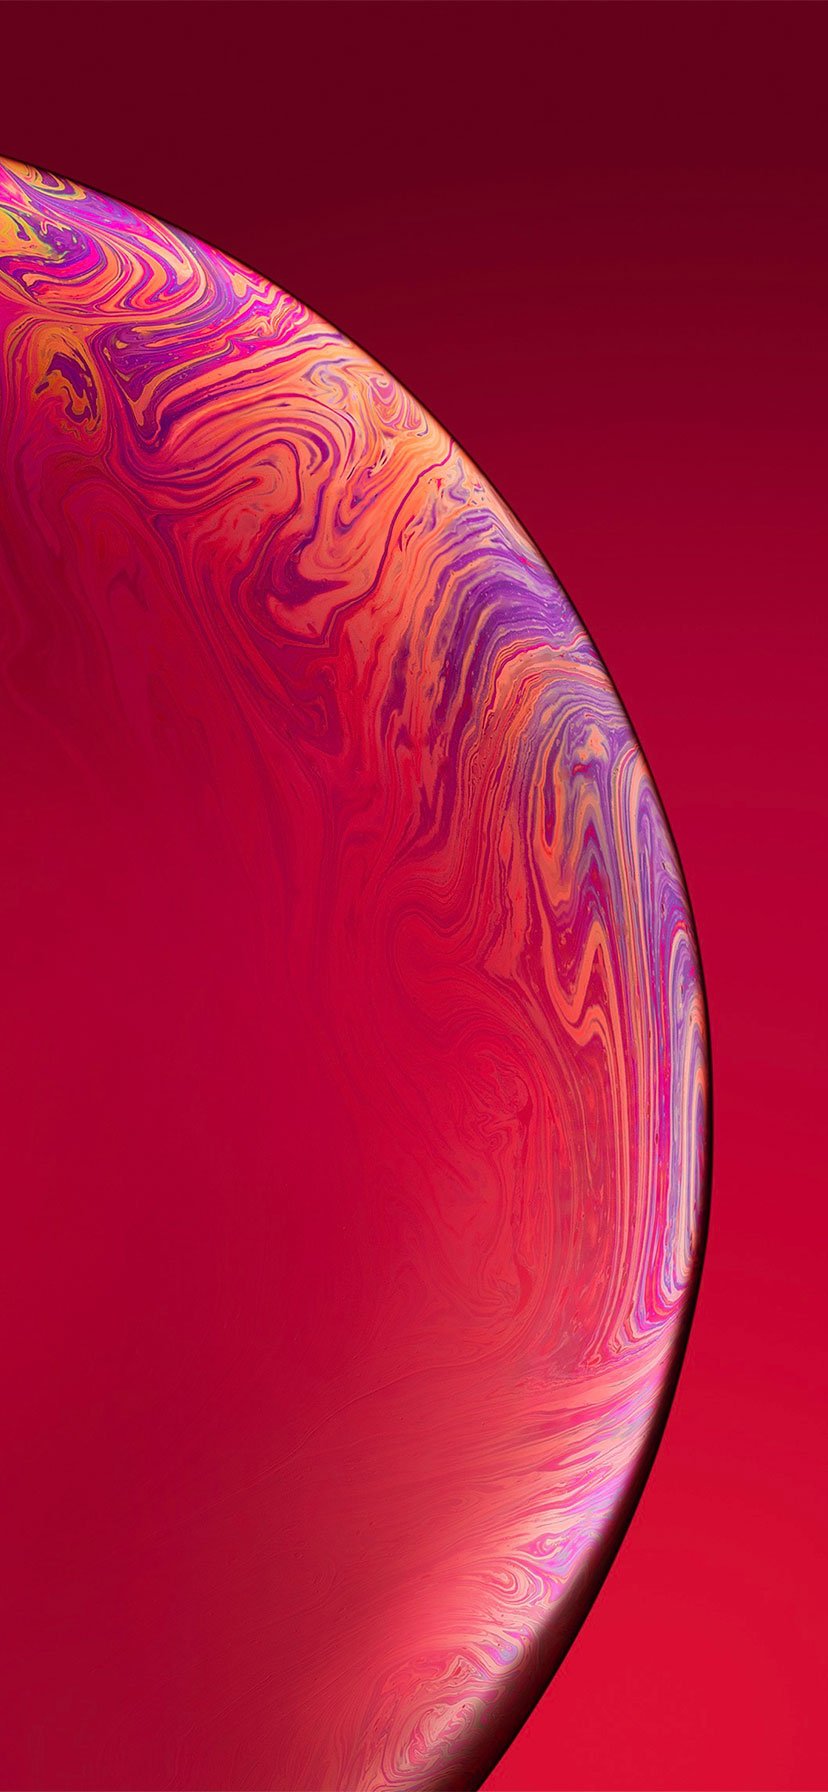 50+ Best High Quality iPhone XR Wallpapers & Backgrounds ...